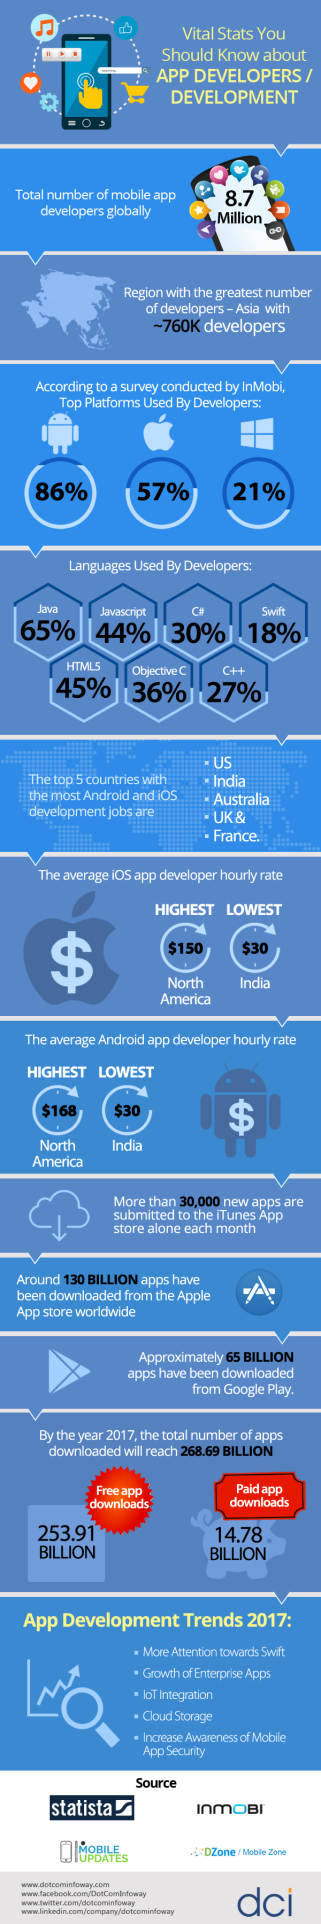 Vital Stats You Should Know About App Developers / Development